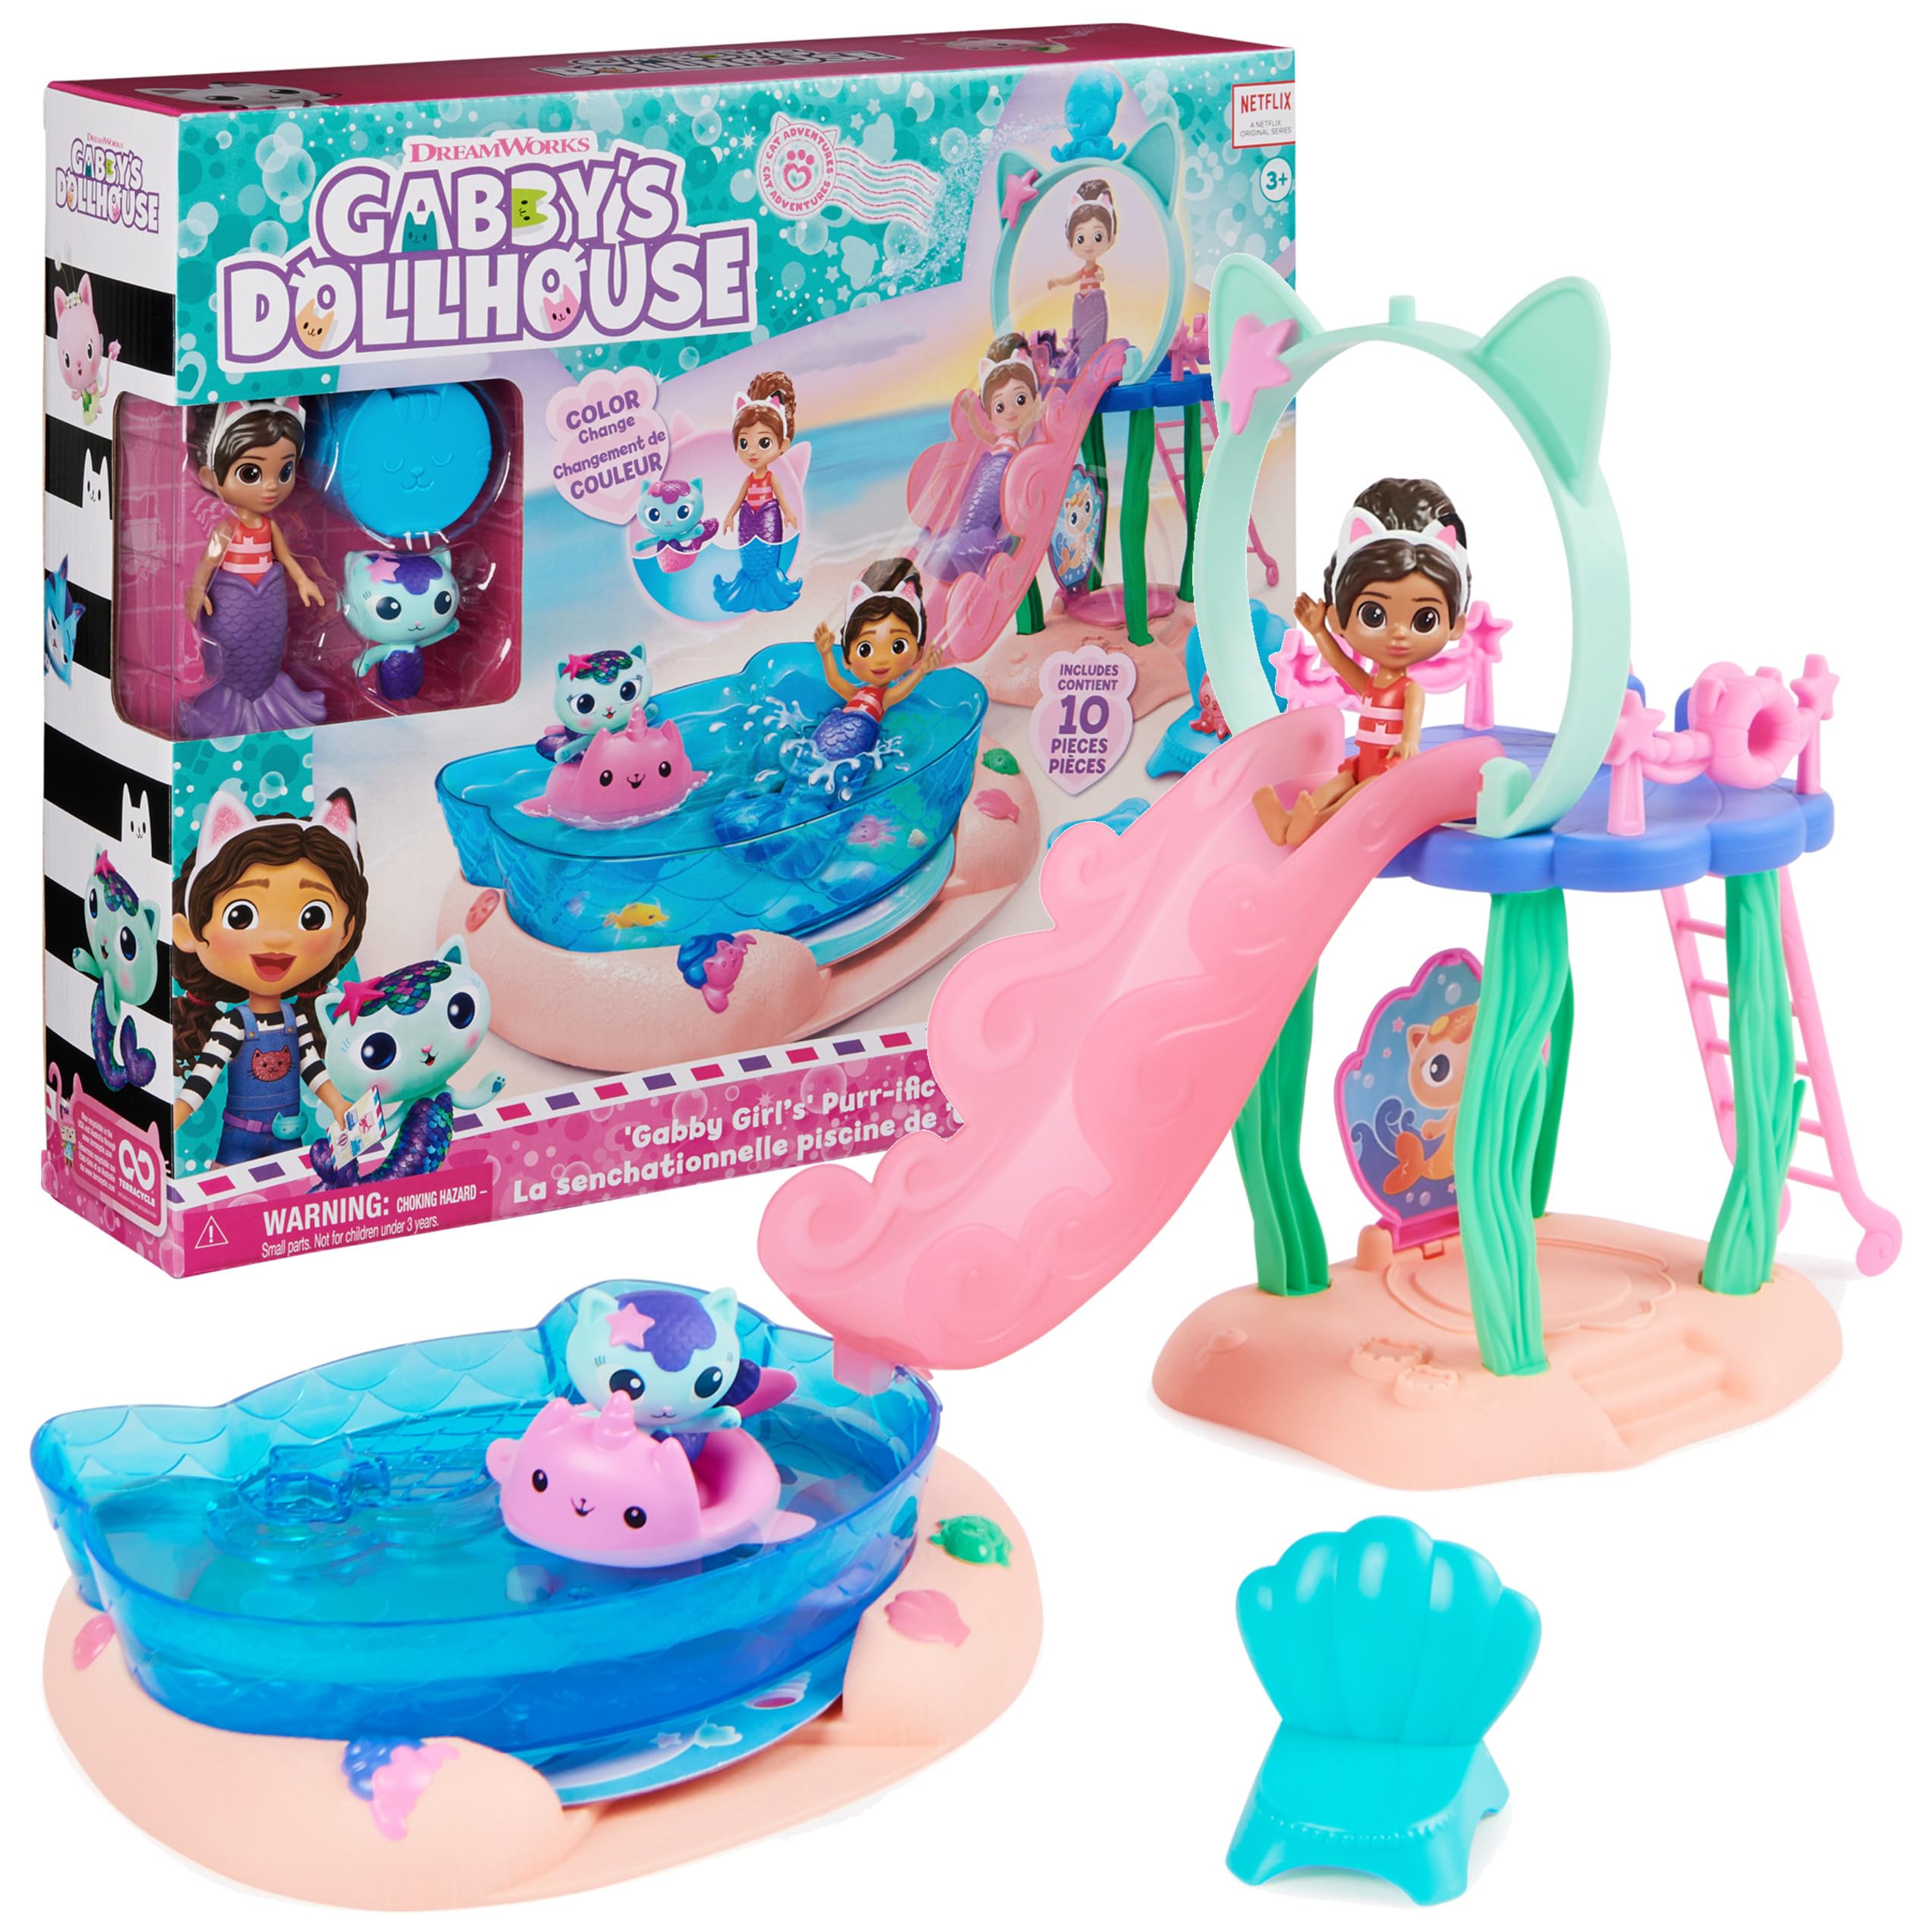 Gabby’s Dollhouse, Purr-ific Pool Playset with Gabby and MerCat Figures, Color-Changing Mermaid Tails and Pool Accessories Kids Toys for Ages 3 and Up